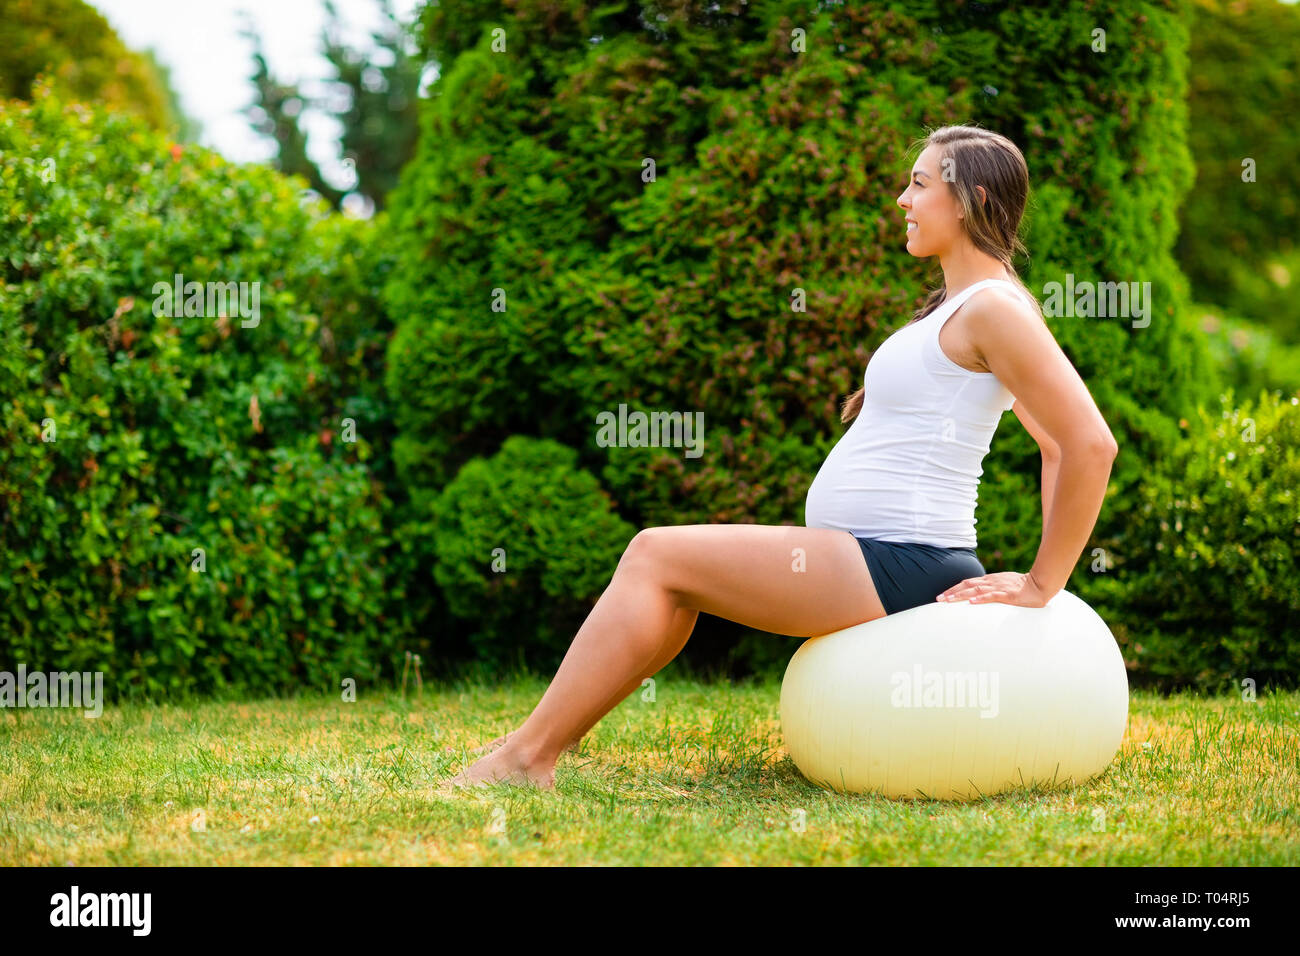 Pregnant Woman Sitting On Yoga Ball In Park Stock Photo